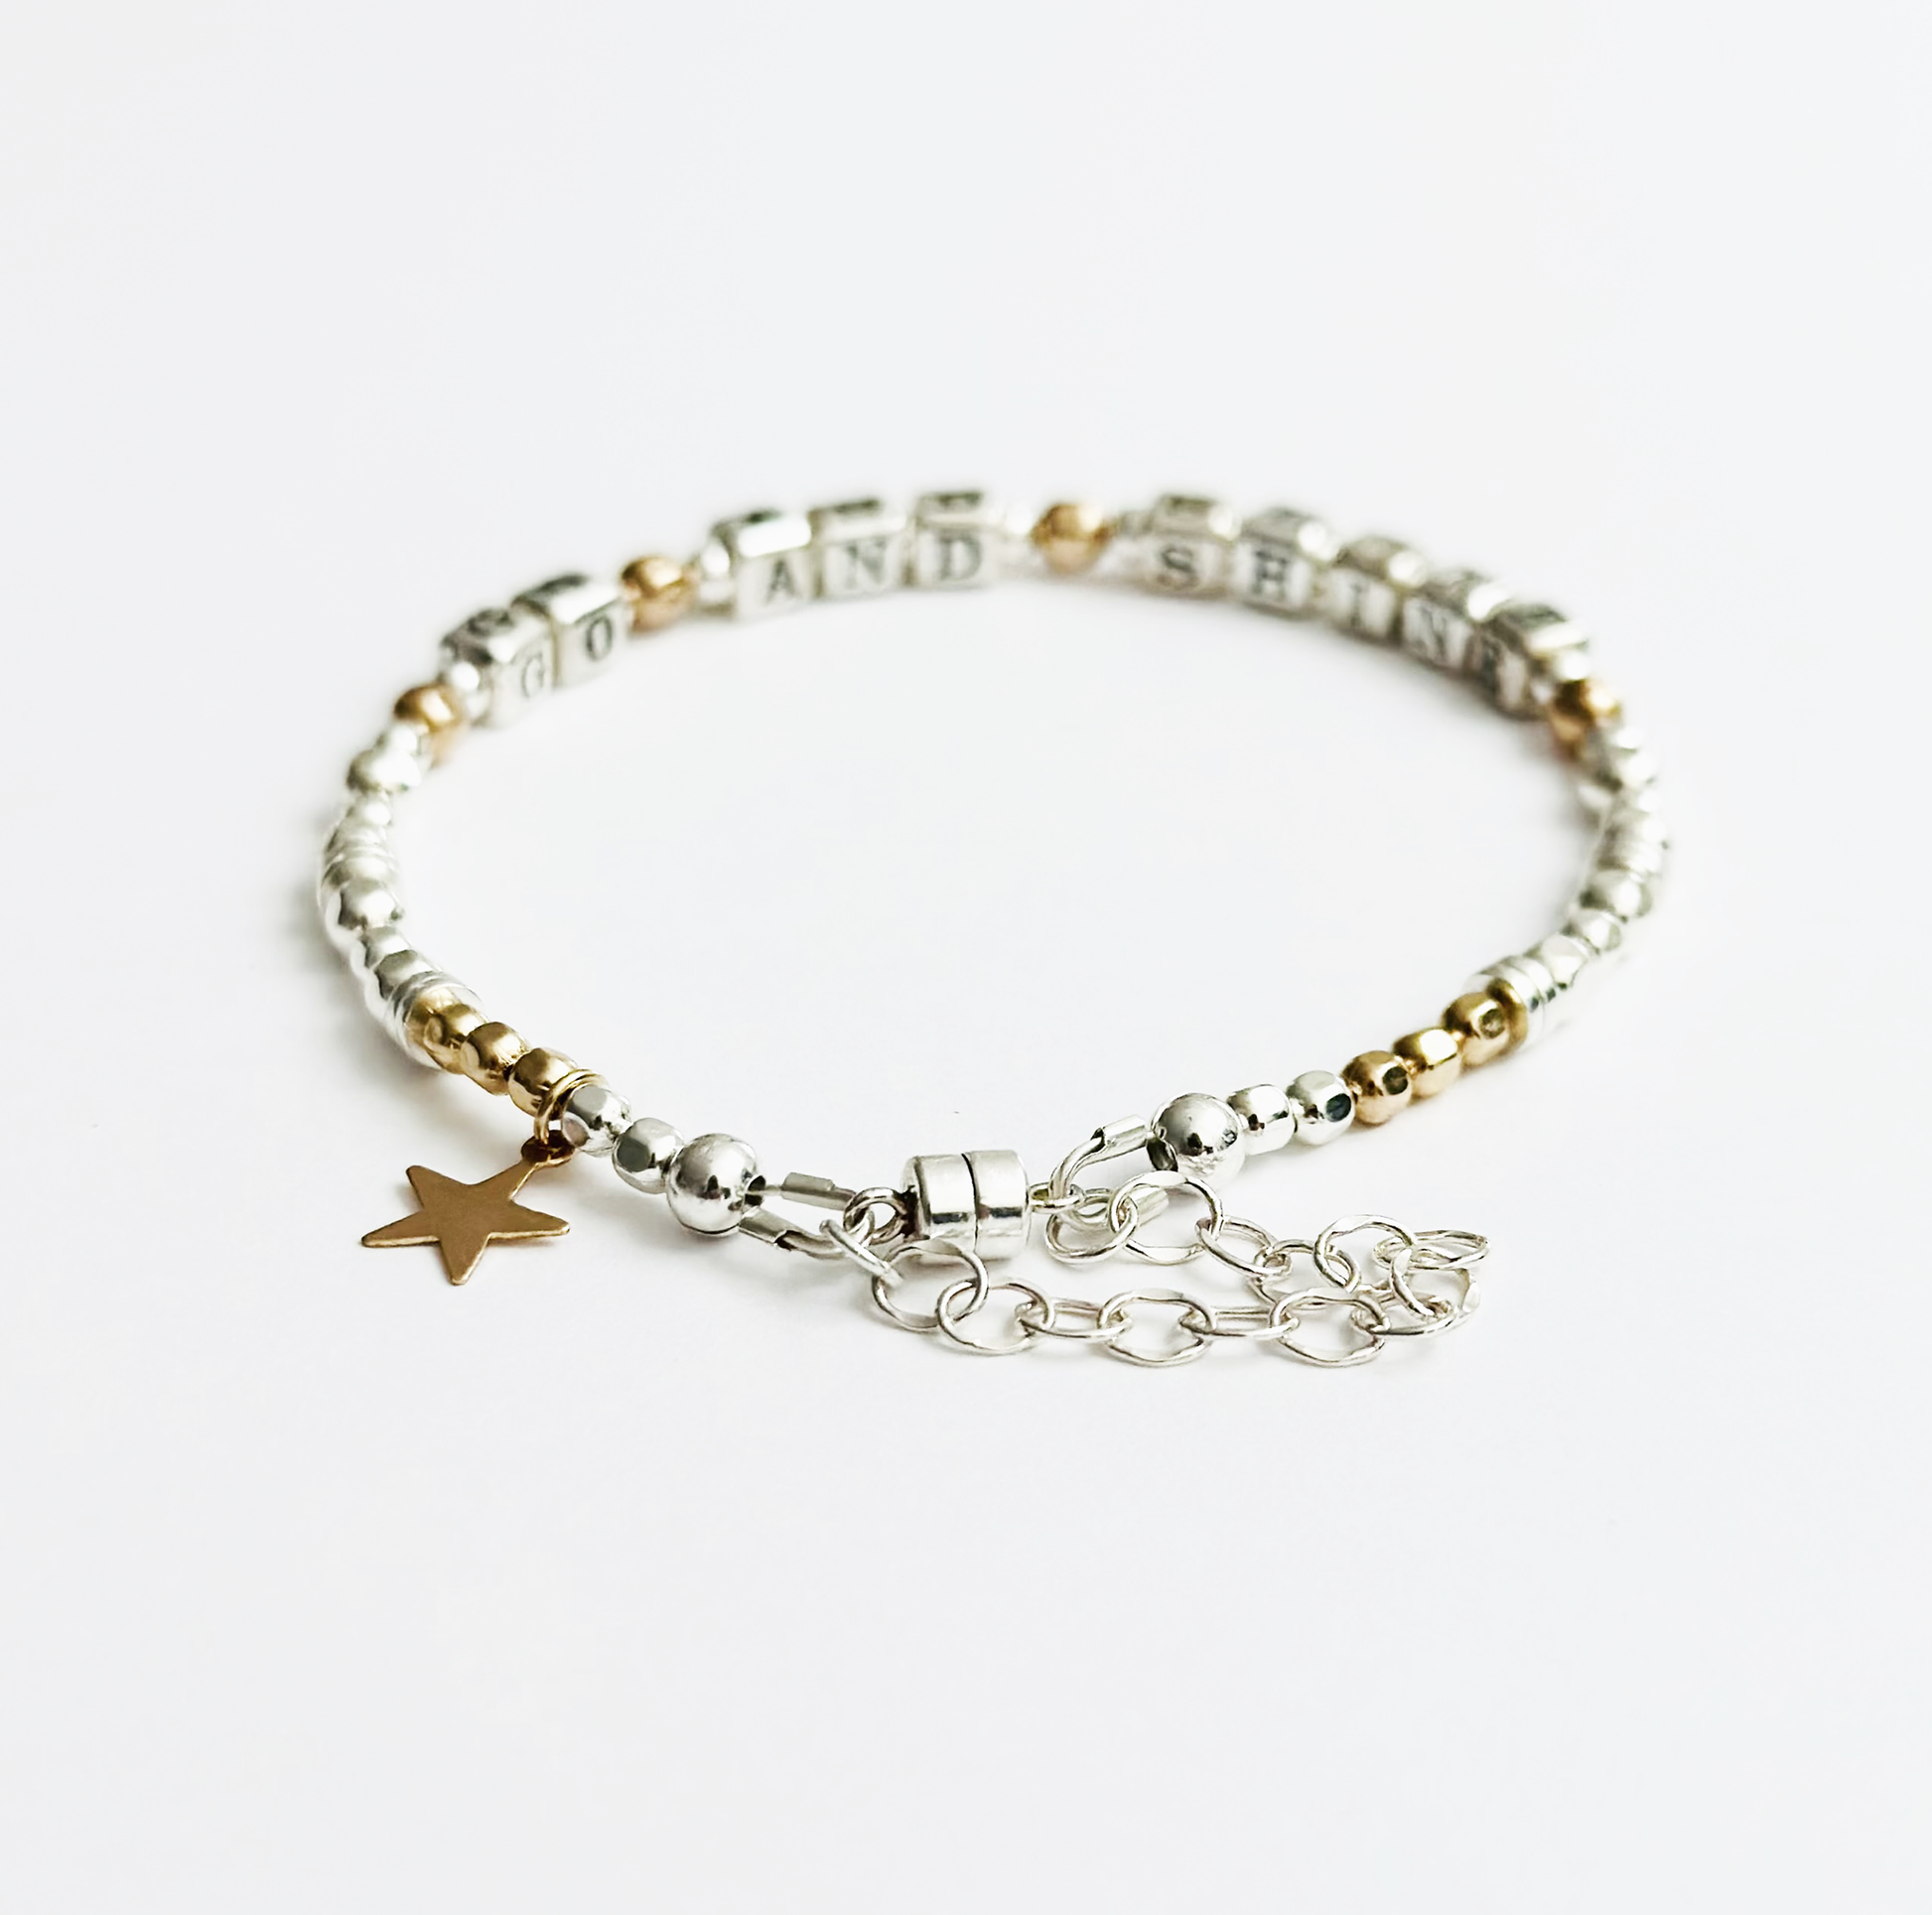 Go and Shine Good Luck, Graduation, New Job Bracelet in sterling silver and gold, featuring a magnetic closure and gold star